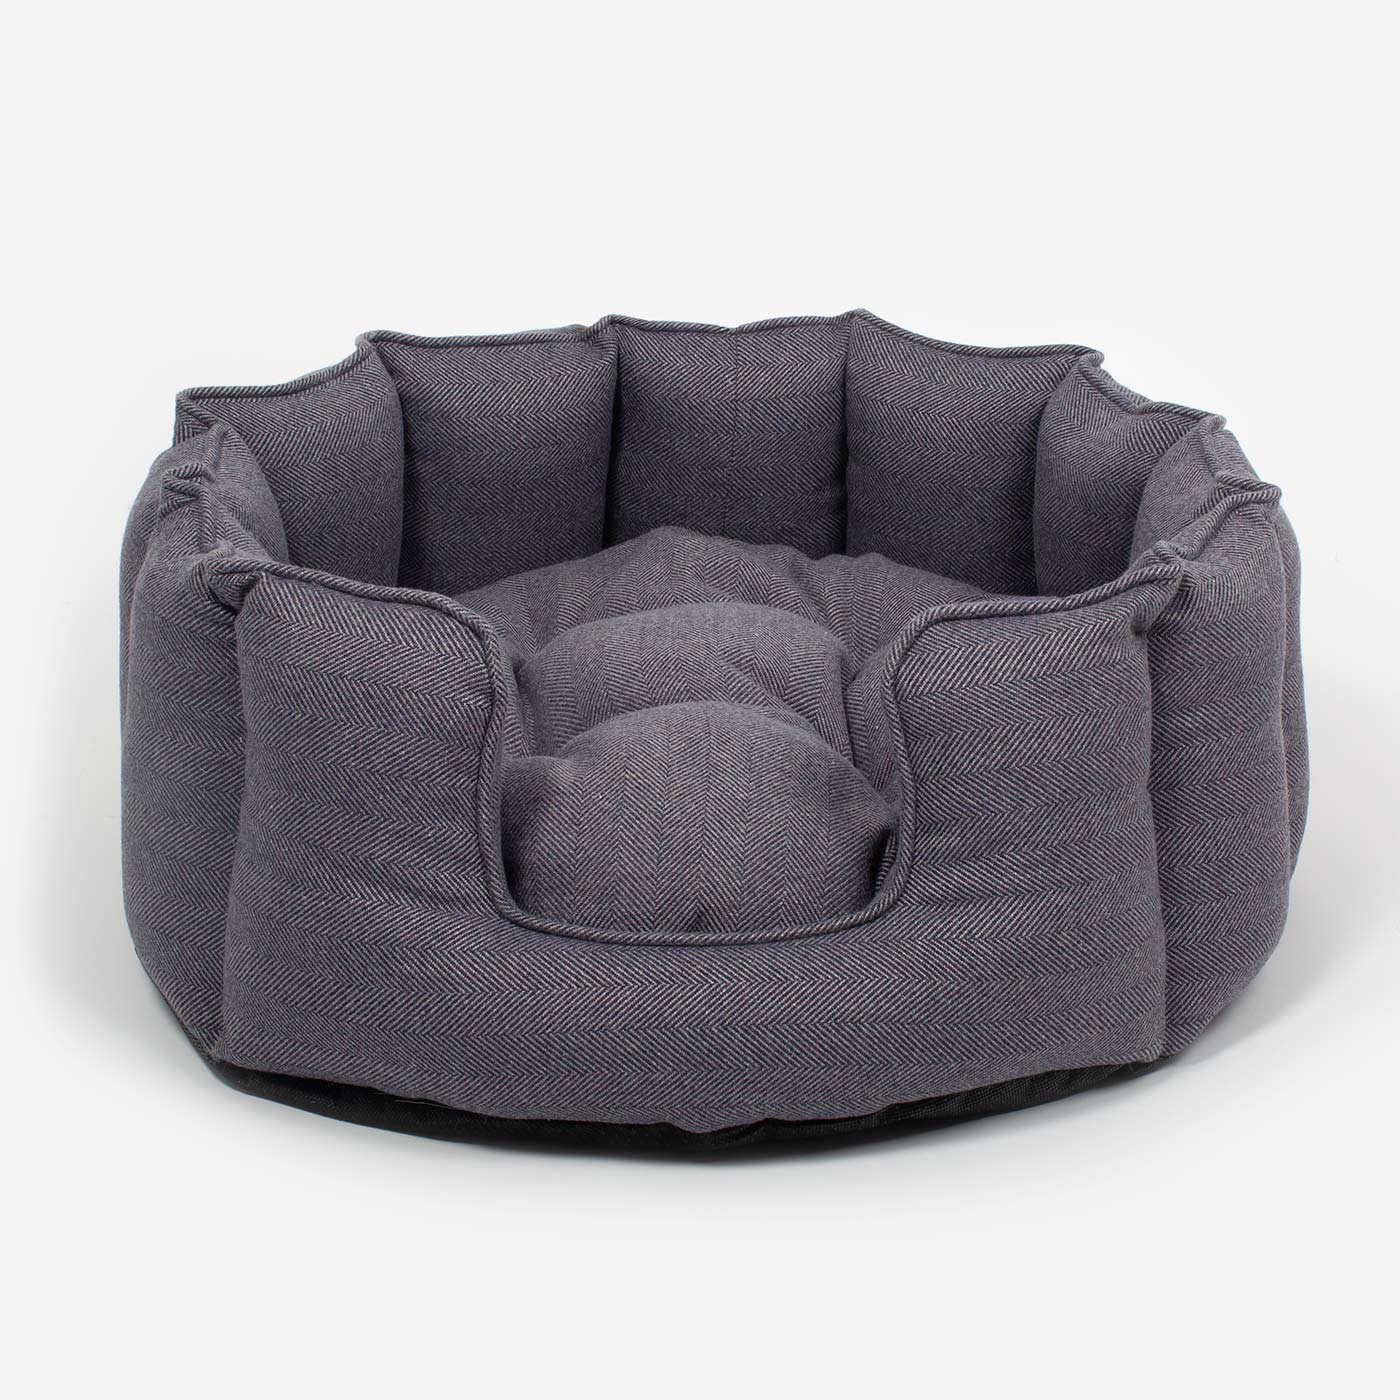 [color:oxford herringbone] Discover Our Luxurious High Wall Bed For Cats, Featuring inner pillow with plush teddy fleece on one side To Craft The Perfect Cat Bed In Stunning Oxford Herringbone Tweed! Available To Personalize Now at Lords & Labradors US